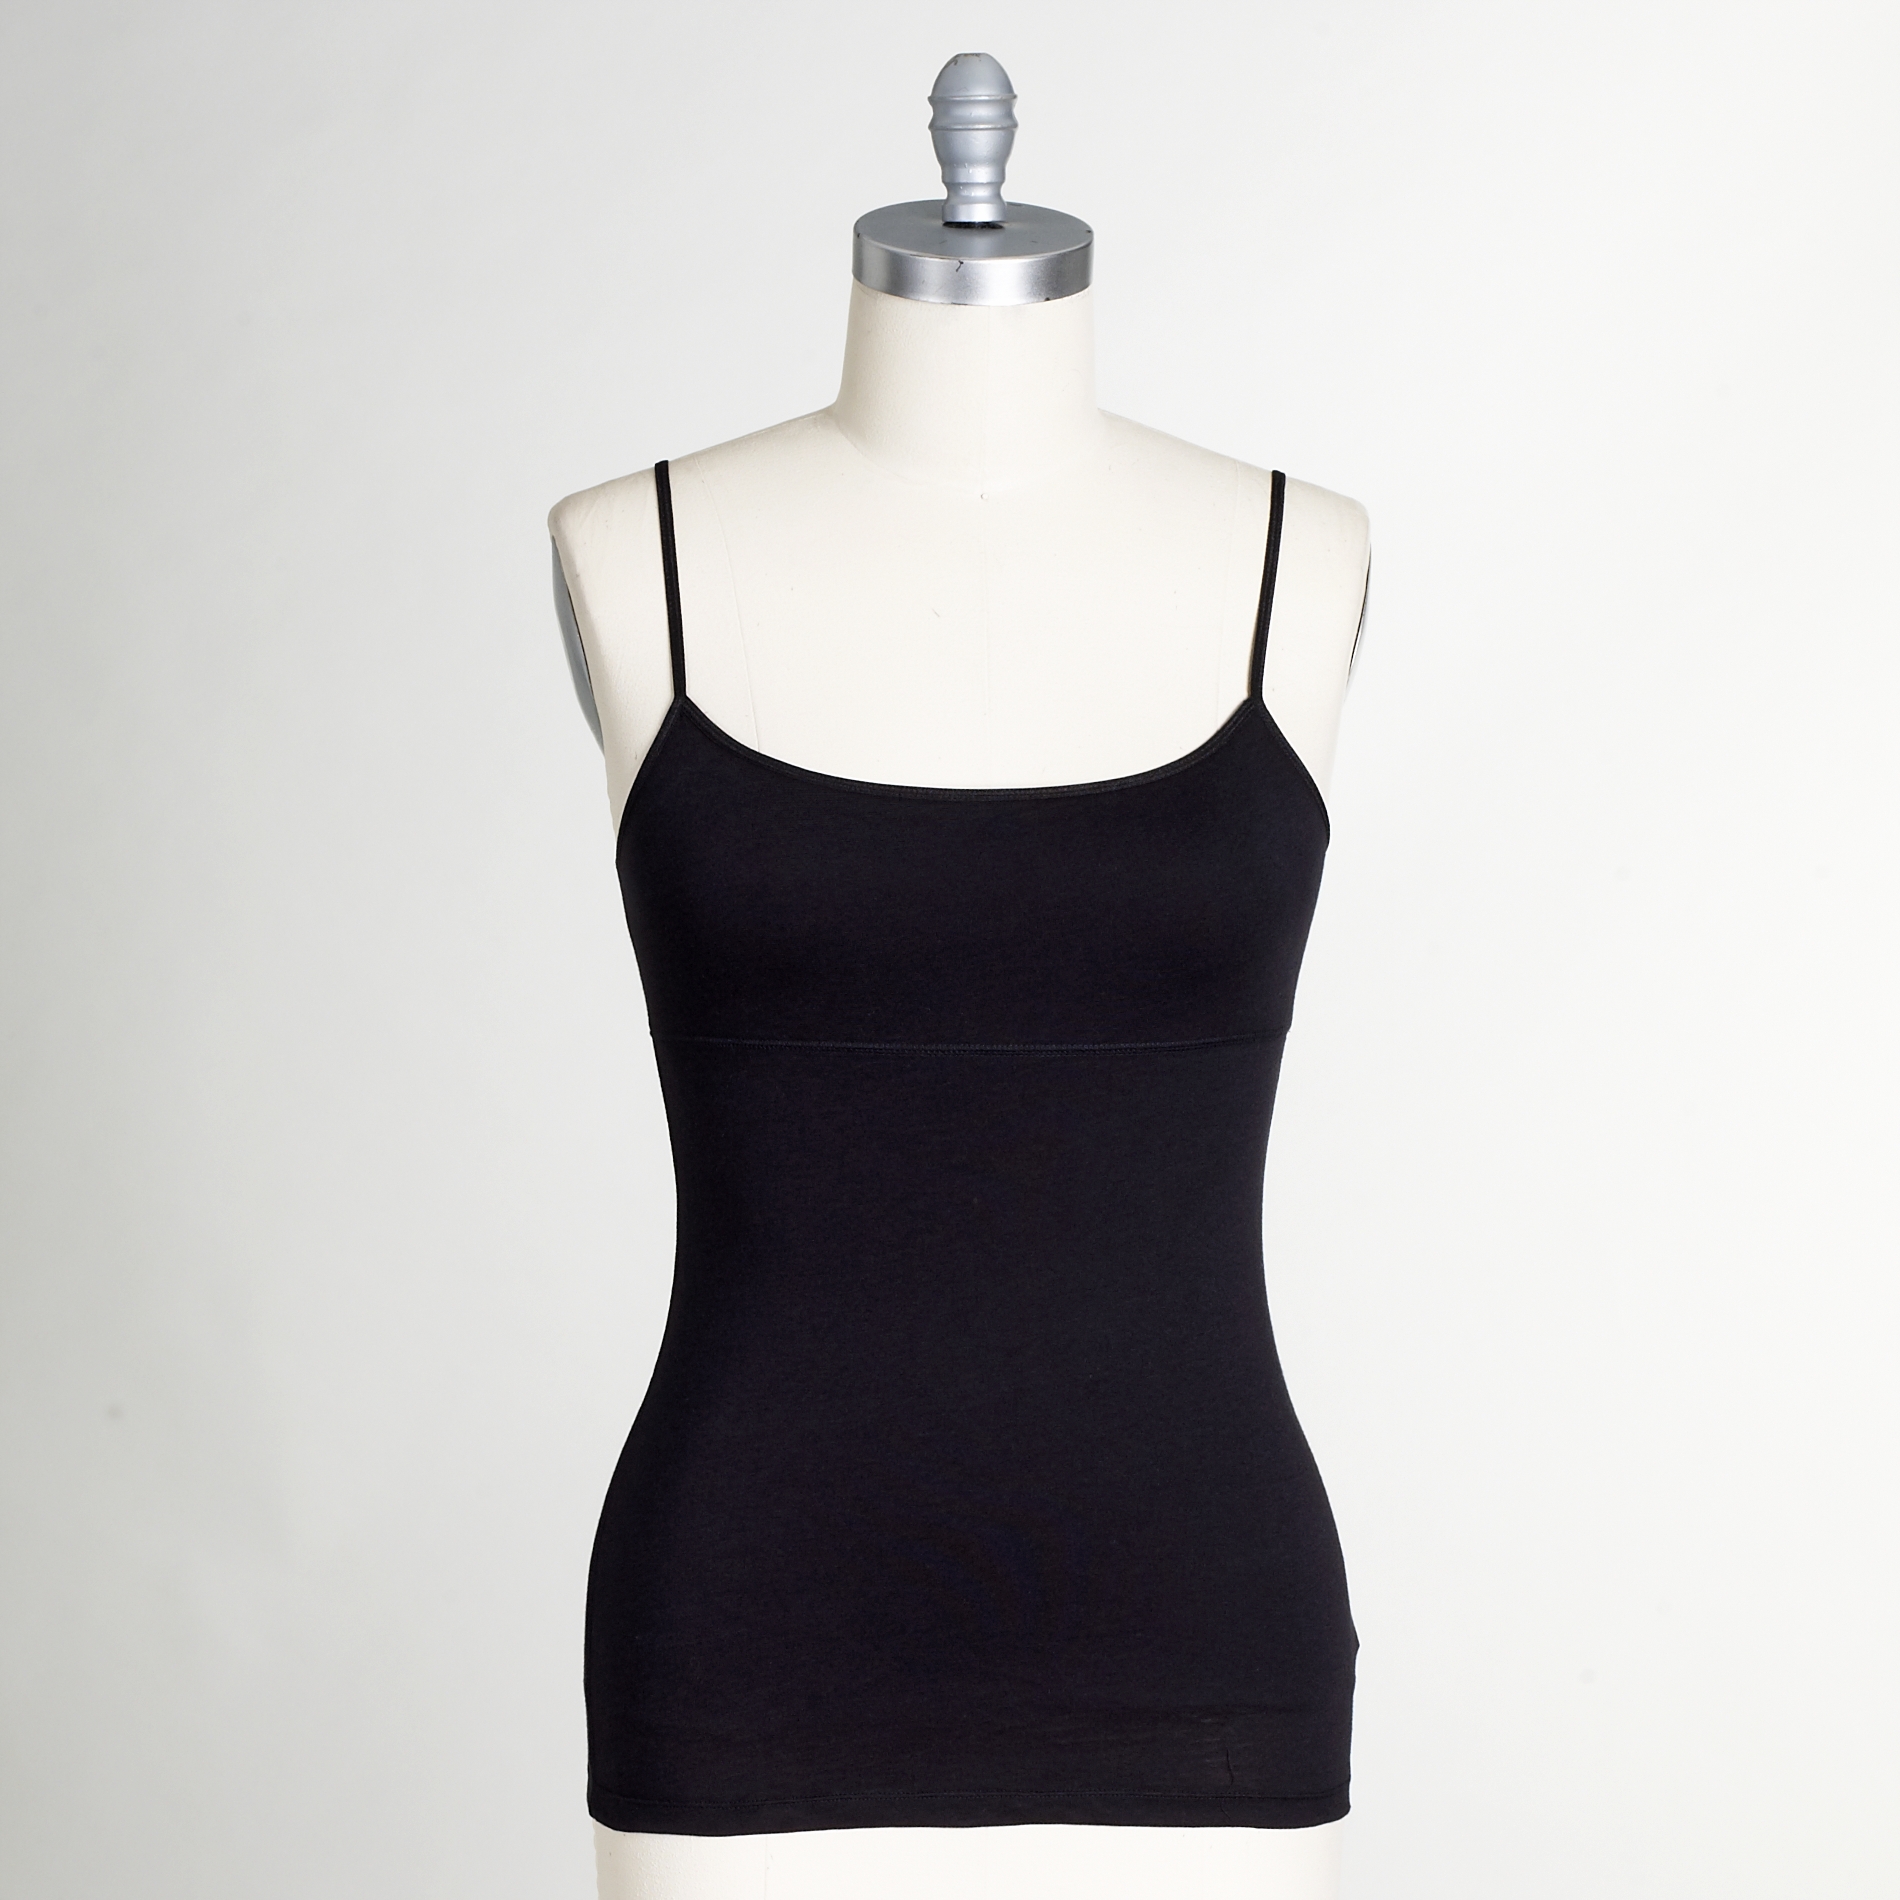 Shapesational Women's Slimming Camisole